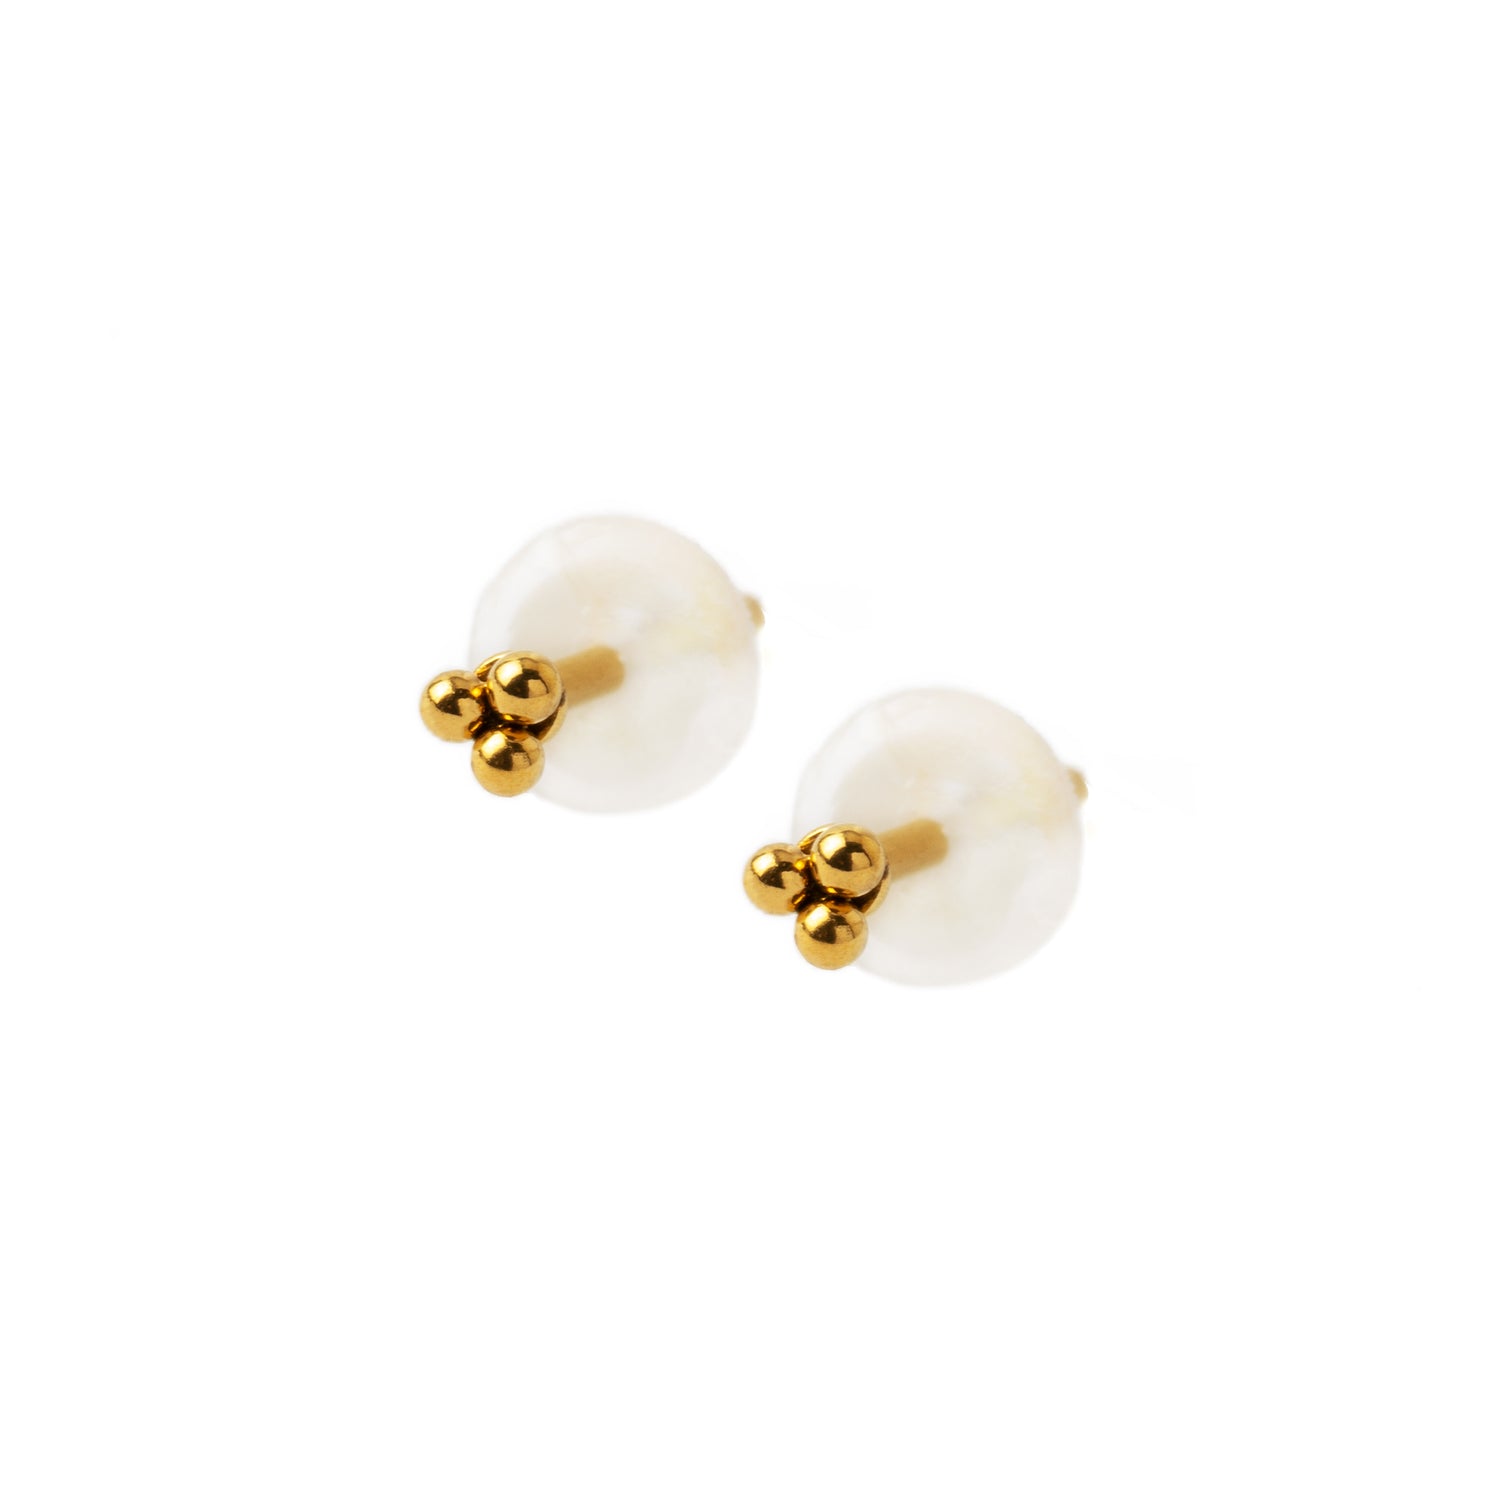 Trinity Golden Ear Studs right side view